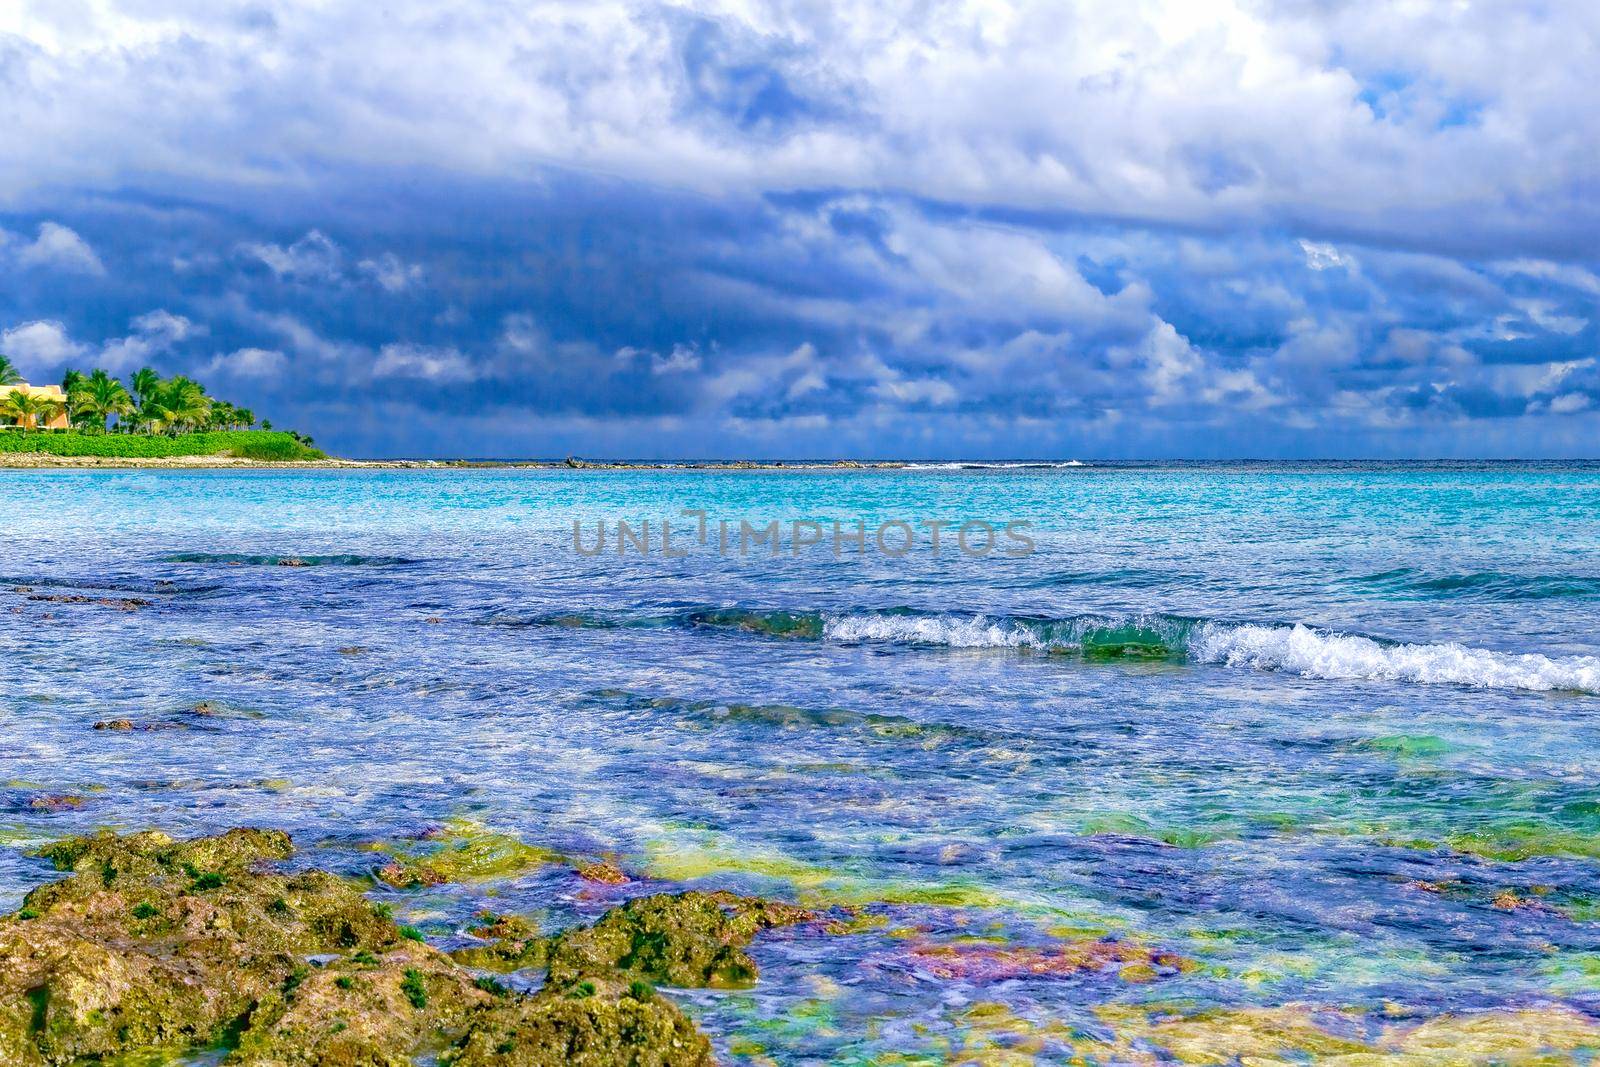 The view from the shore of a beautiful tropical sea with a beach. The warm waters of the ocean bathe colorful stones in the water. Vacation concept.